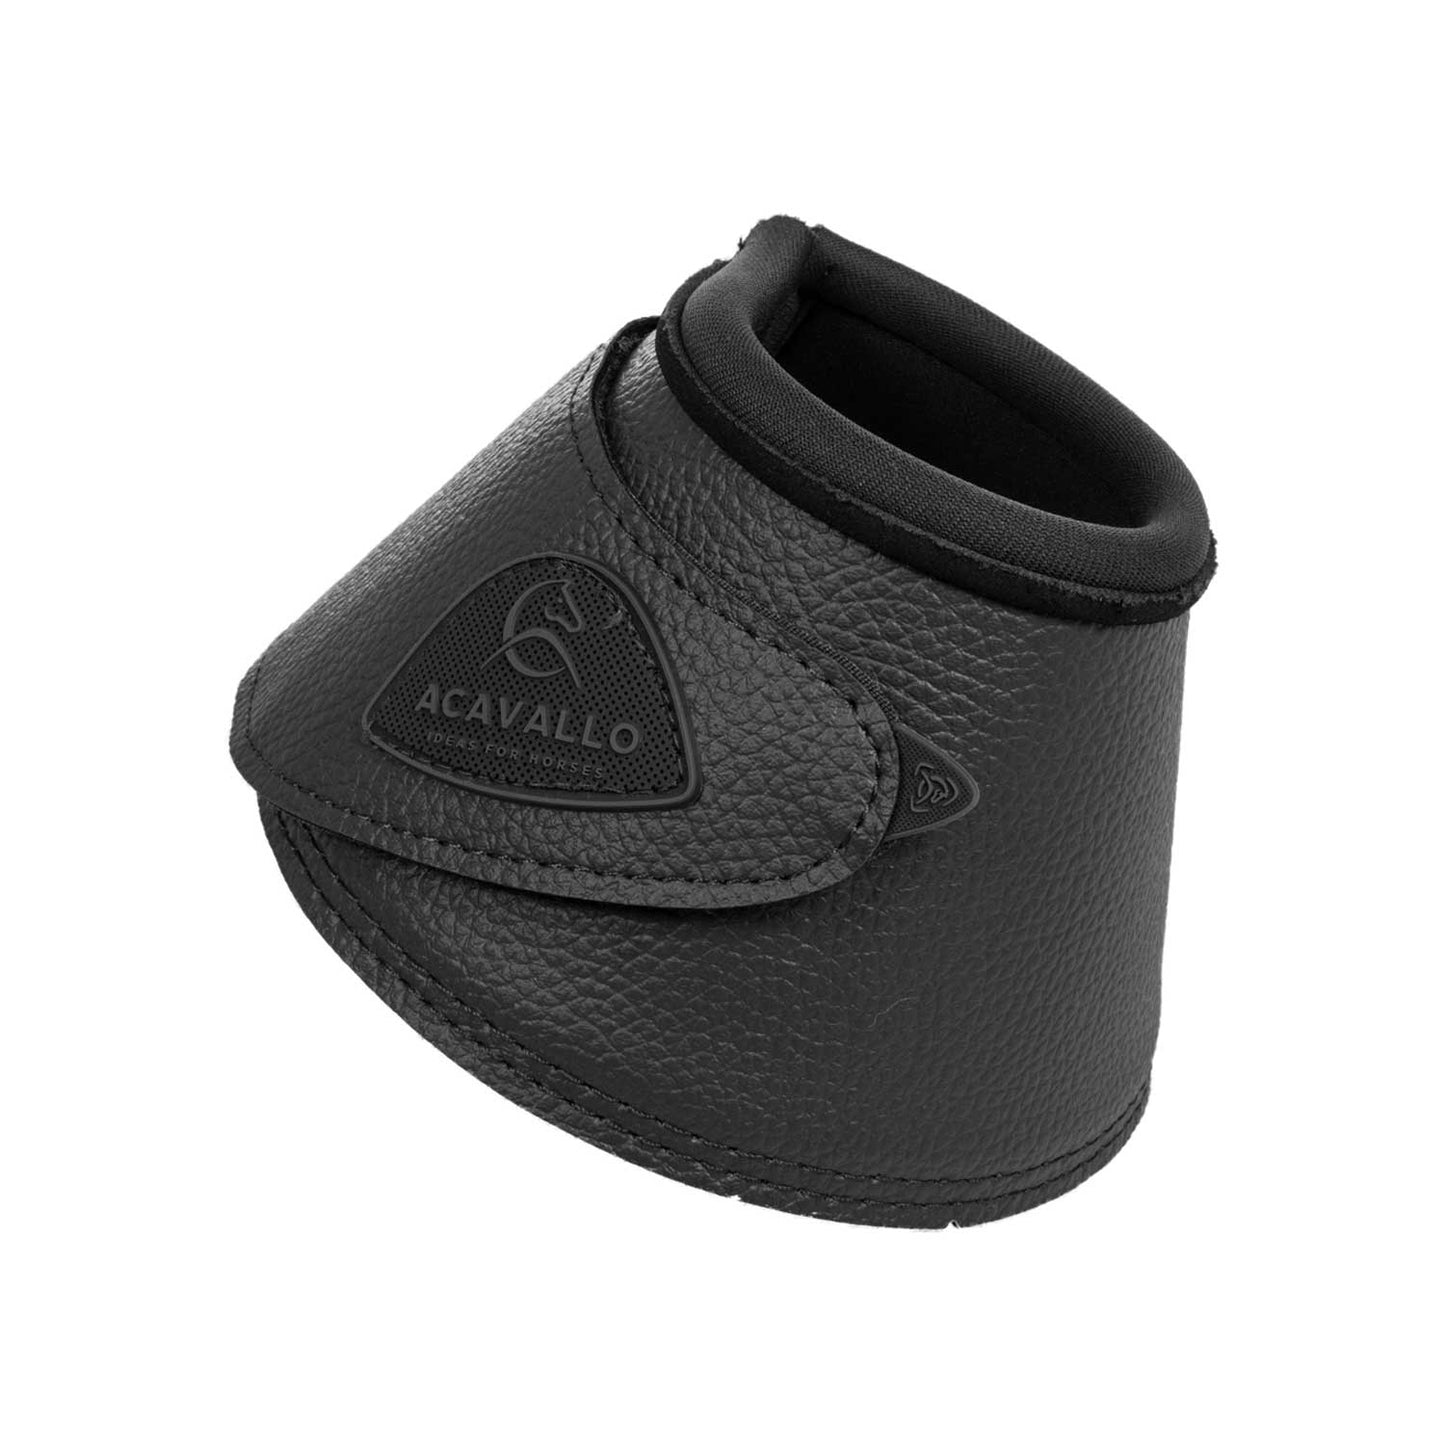 ACAVALLO - Bell Boots Eco-Leather & Velcro Closure